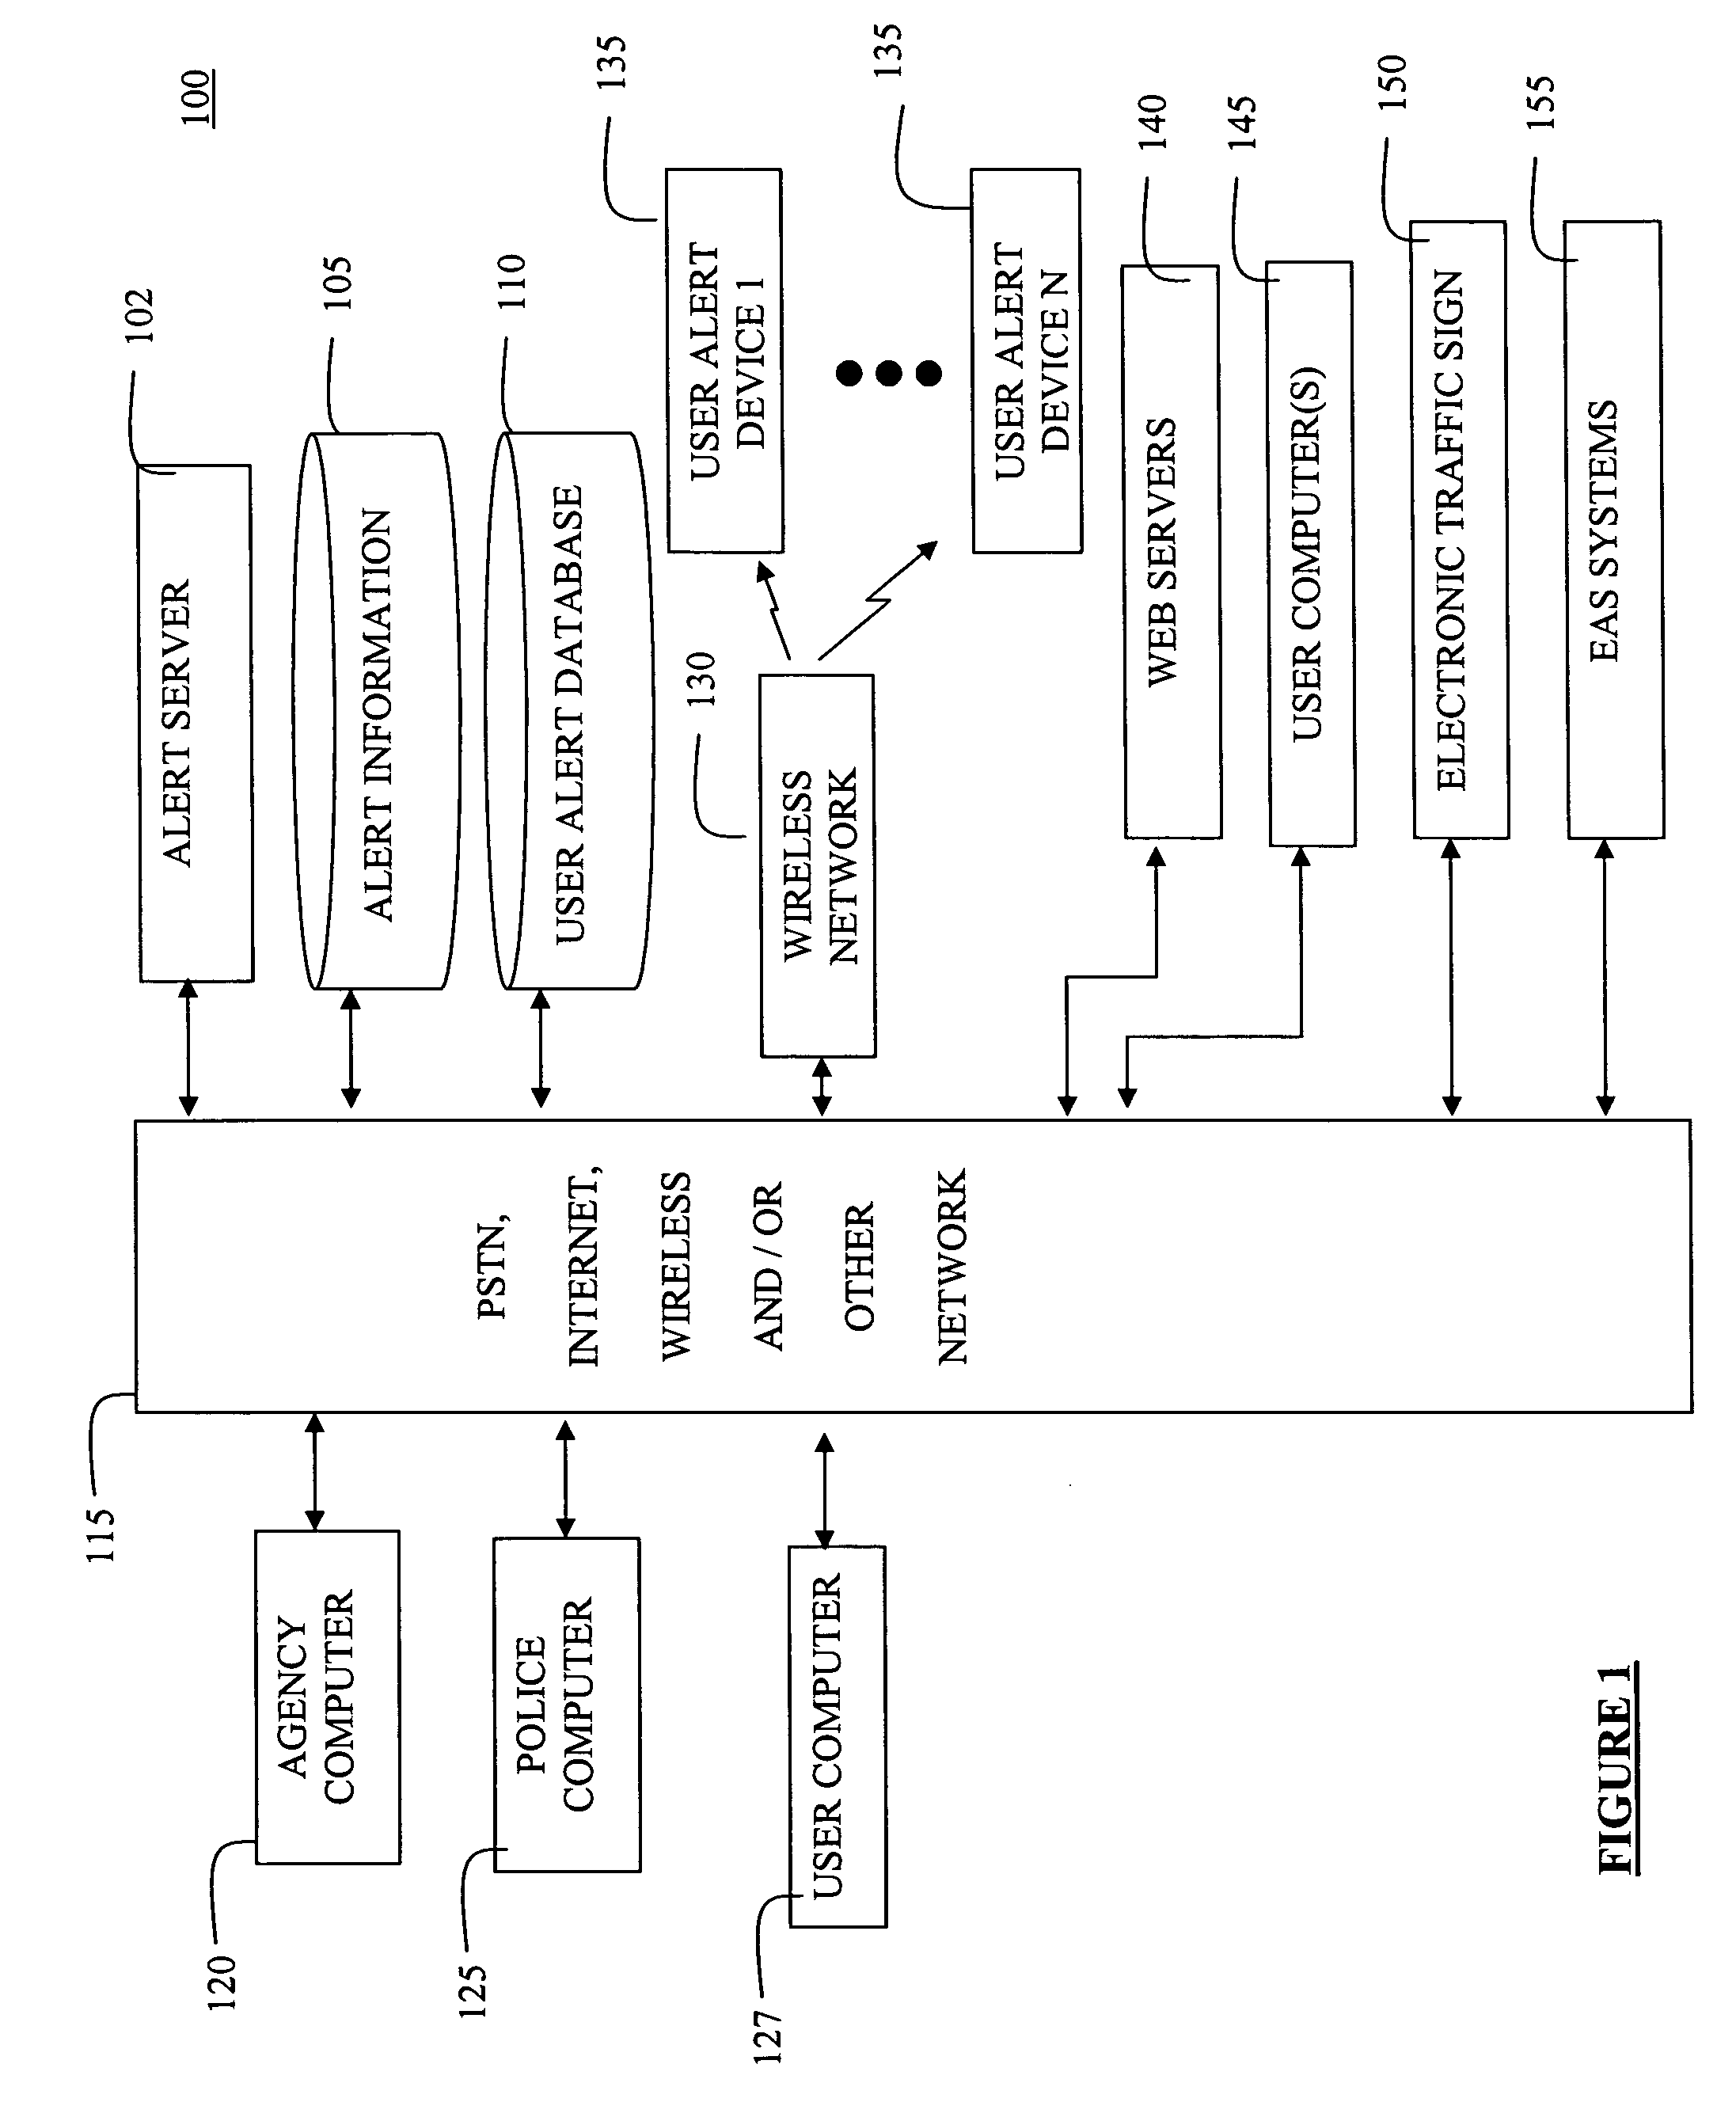 Locality based alert method and apparatus